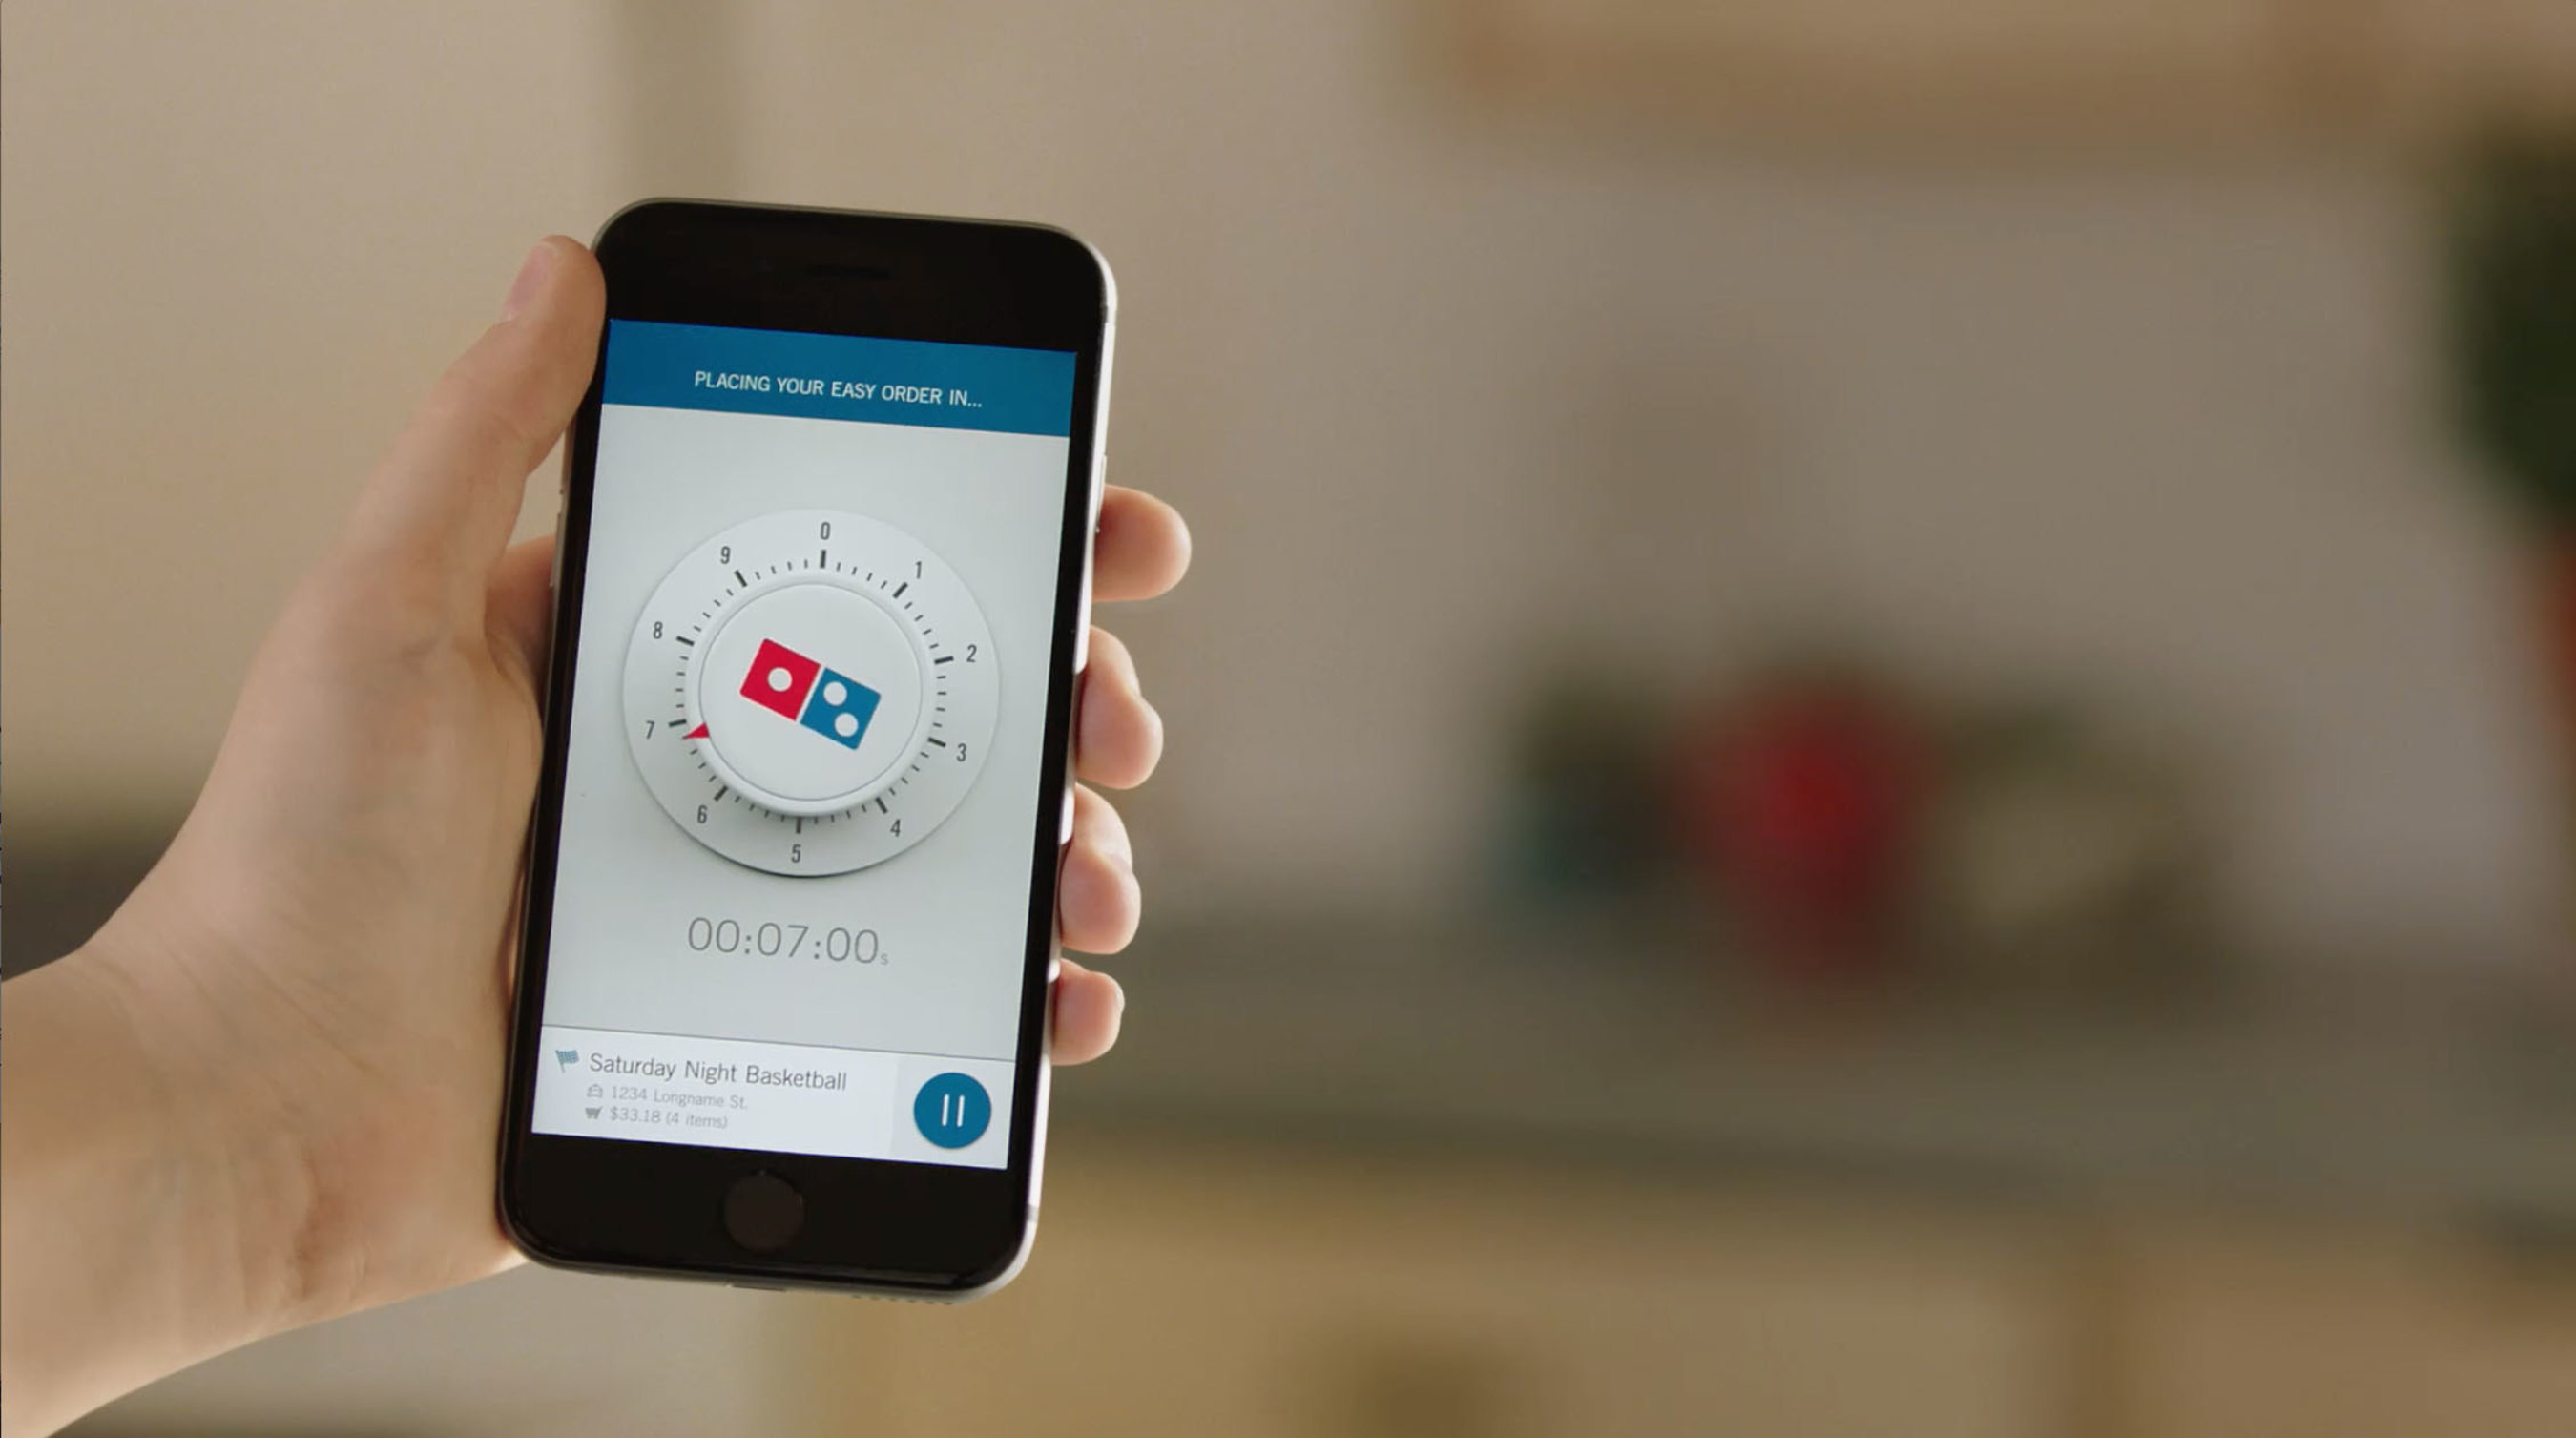 Domino's is launching the easiest way for consumers to order yet: zero-click ordering. Domino's new Zero Click app for iOS and Android is available beginning today and allows customers to easily place their Easy Order.